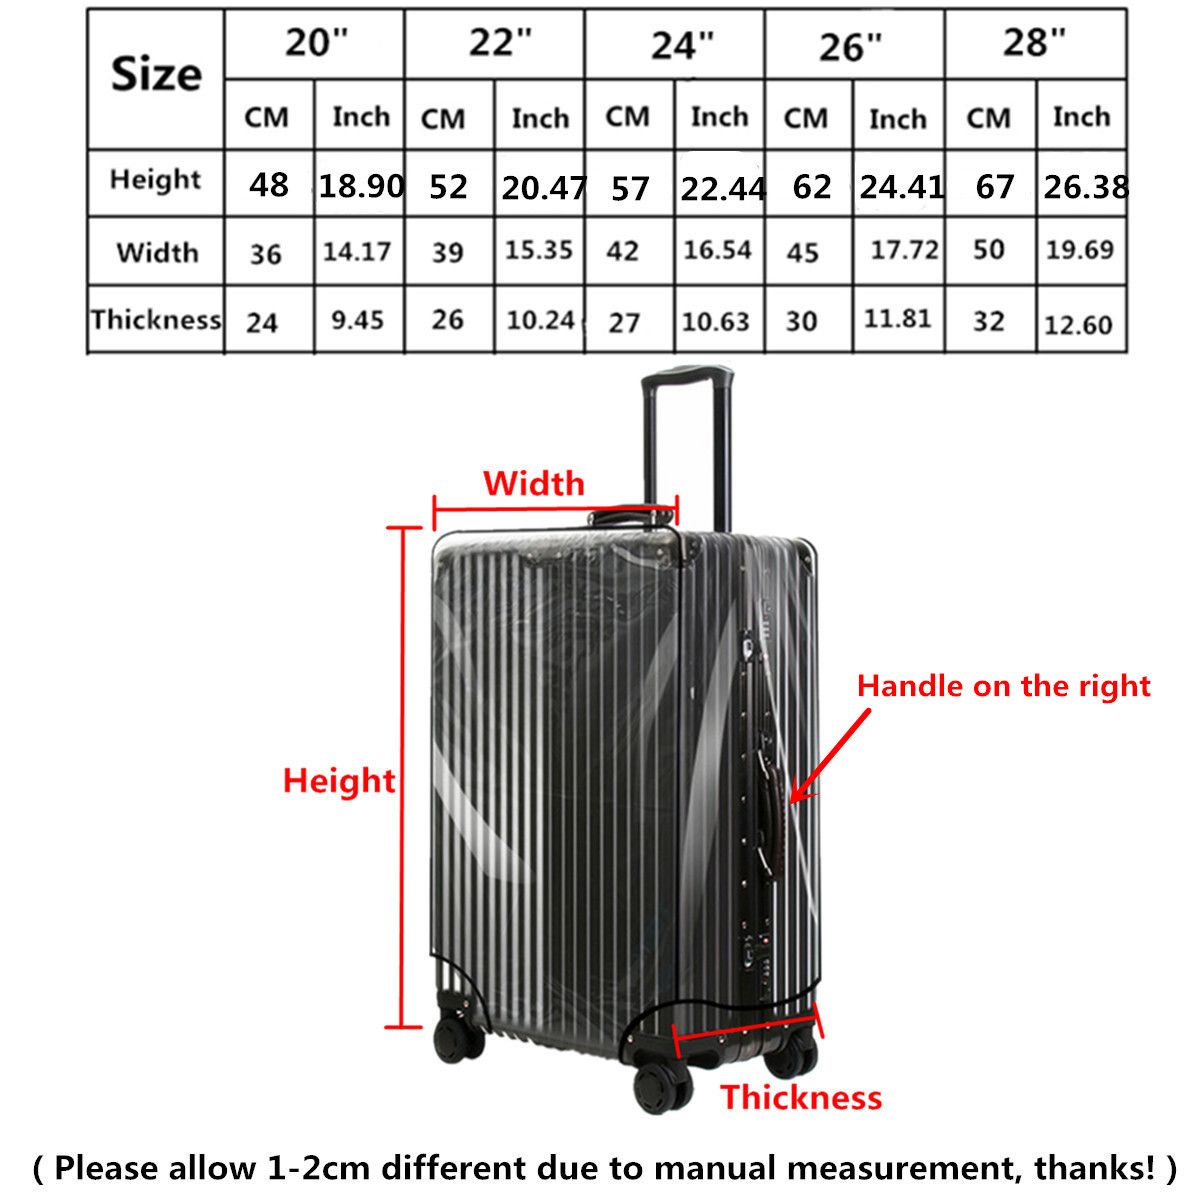 Universal-Waterproof-Transparent-Protective-Luggage-Cover-Suitcase-Case-Travel-1299799